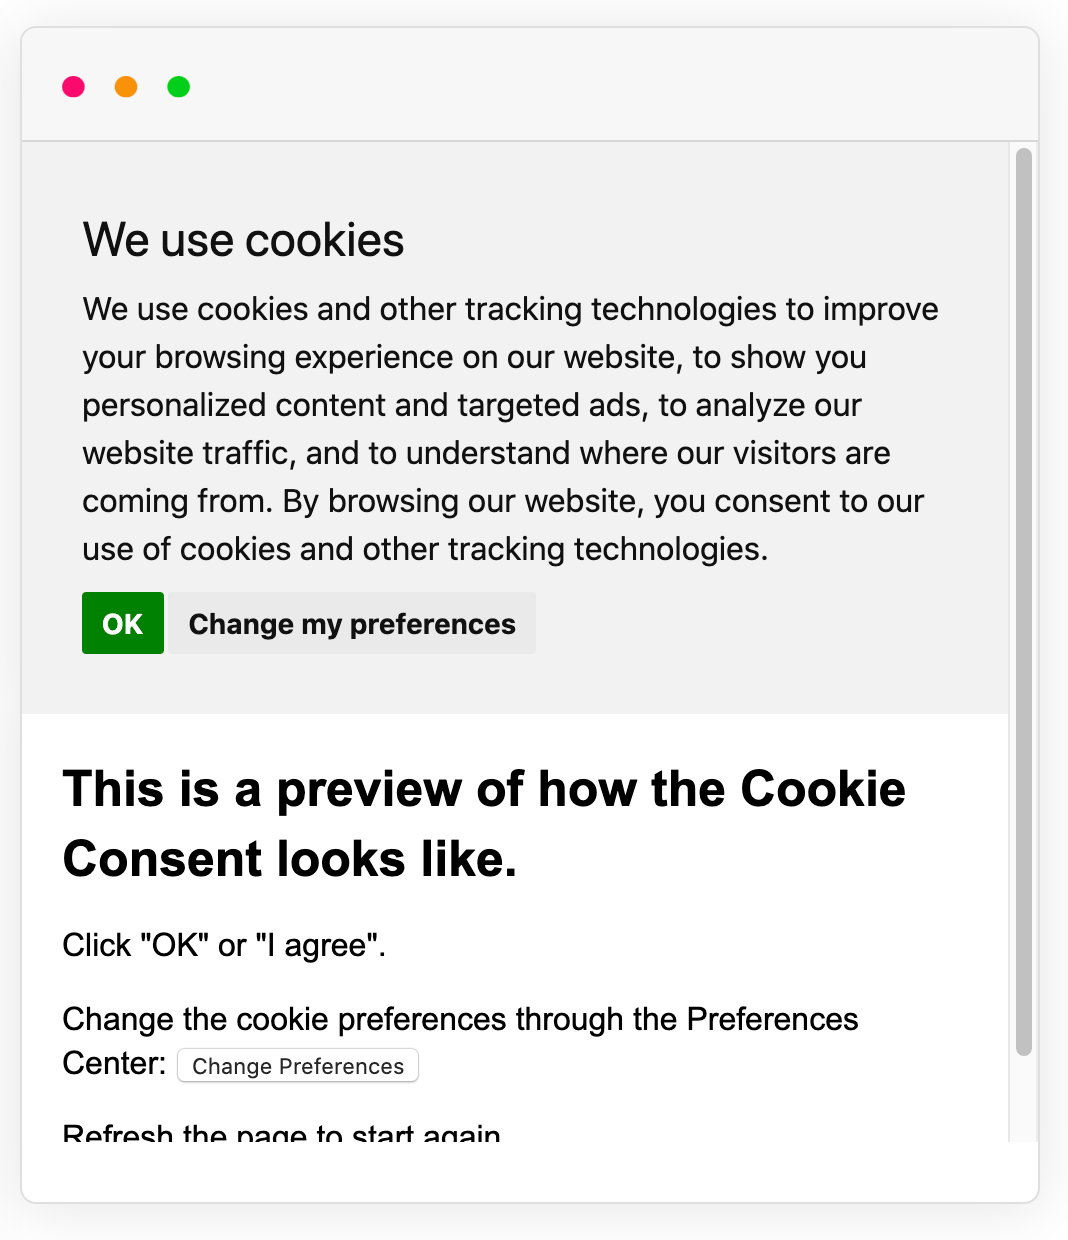 Example of Cookie Consent with ePrivacy Directive consent preference